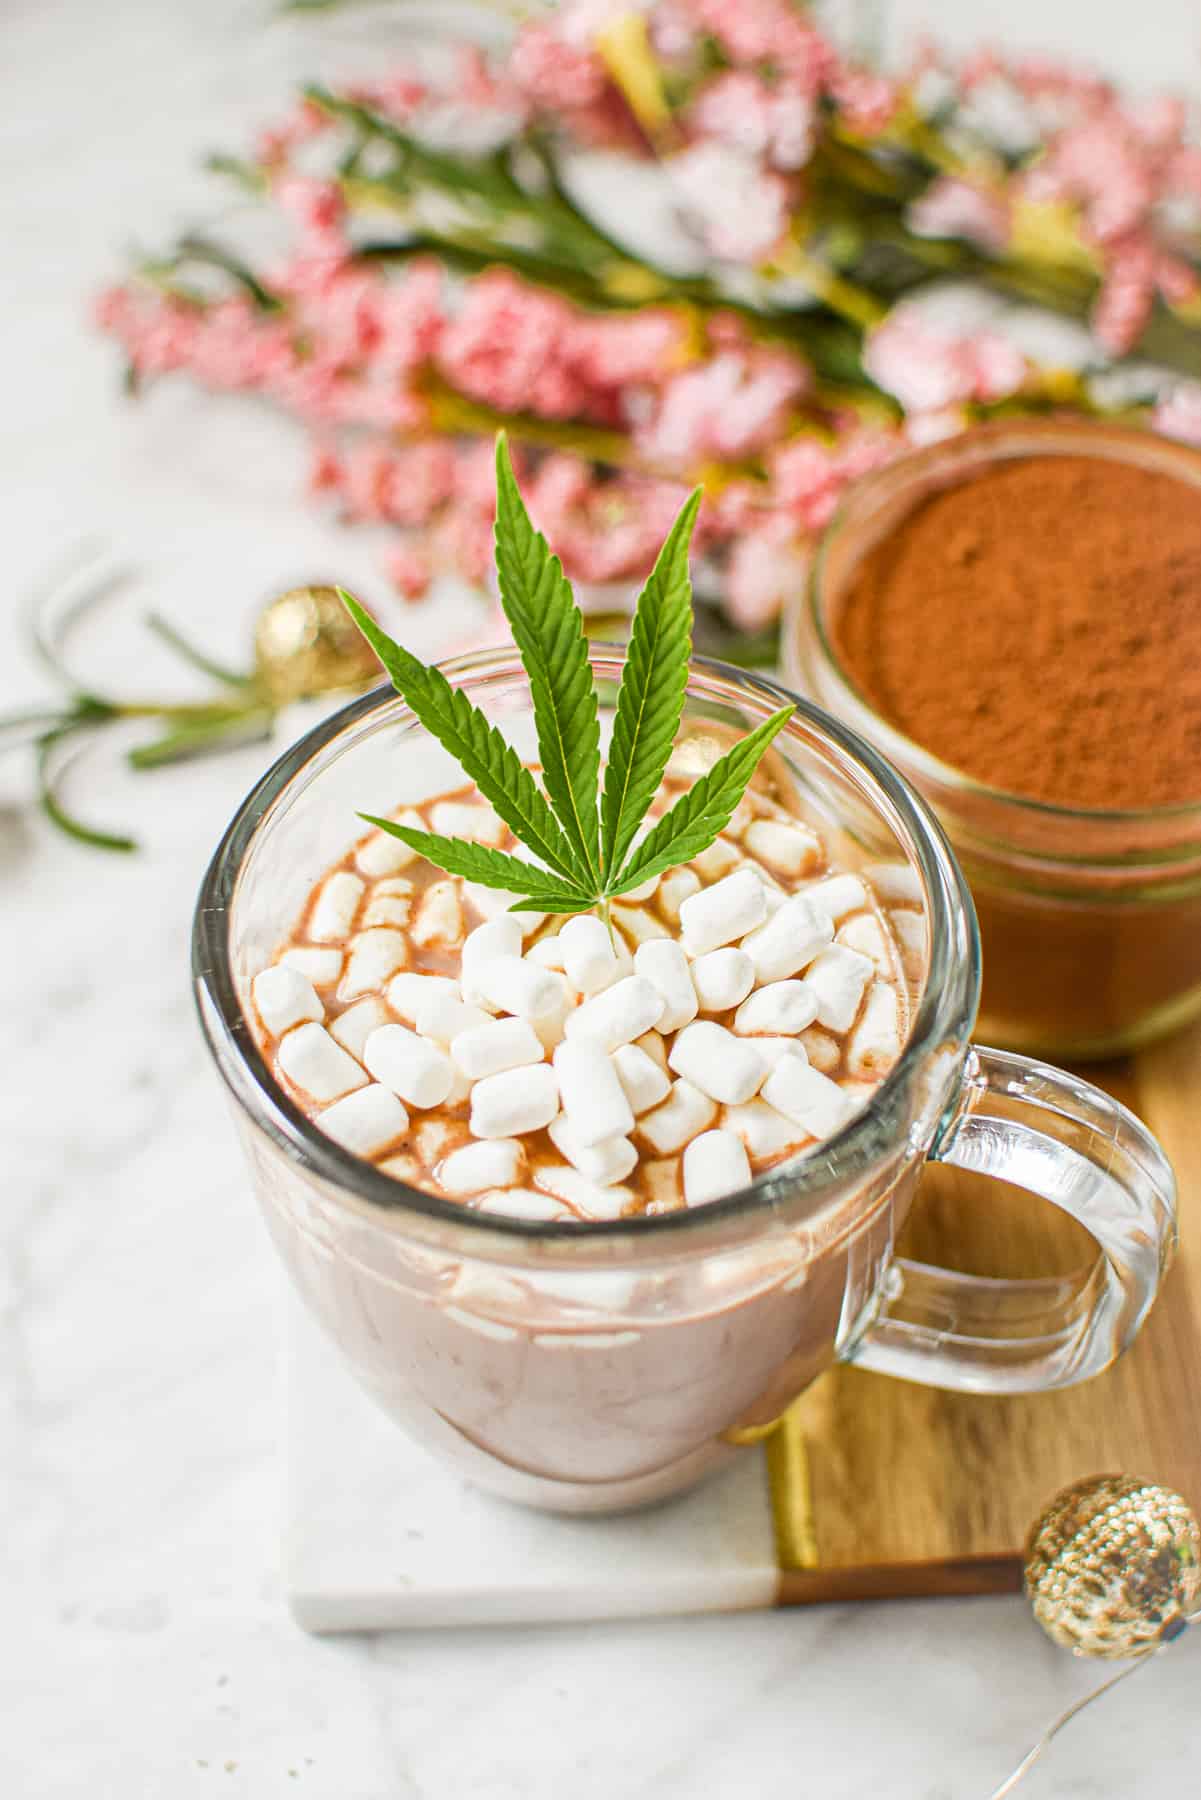 A white countertop with a cutting board topped with a clear mug full of cannabis hot cocoa with marshmallows, garnished with a cannabis leaf